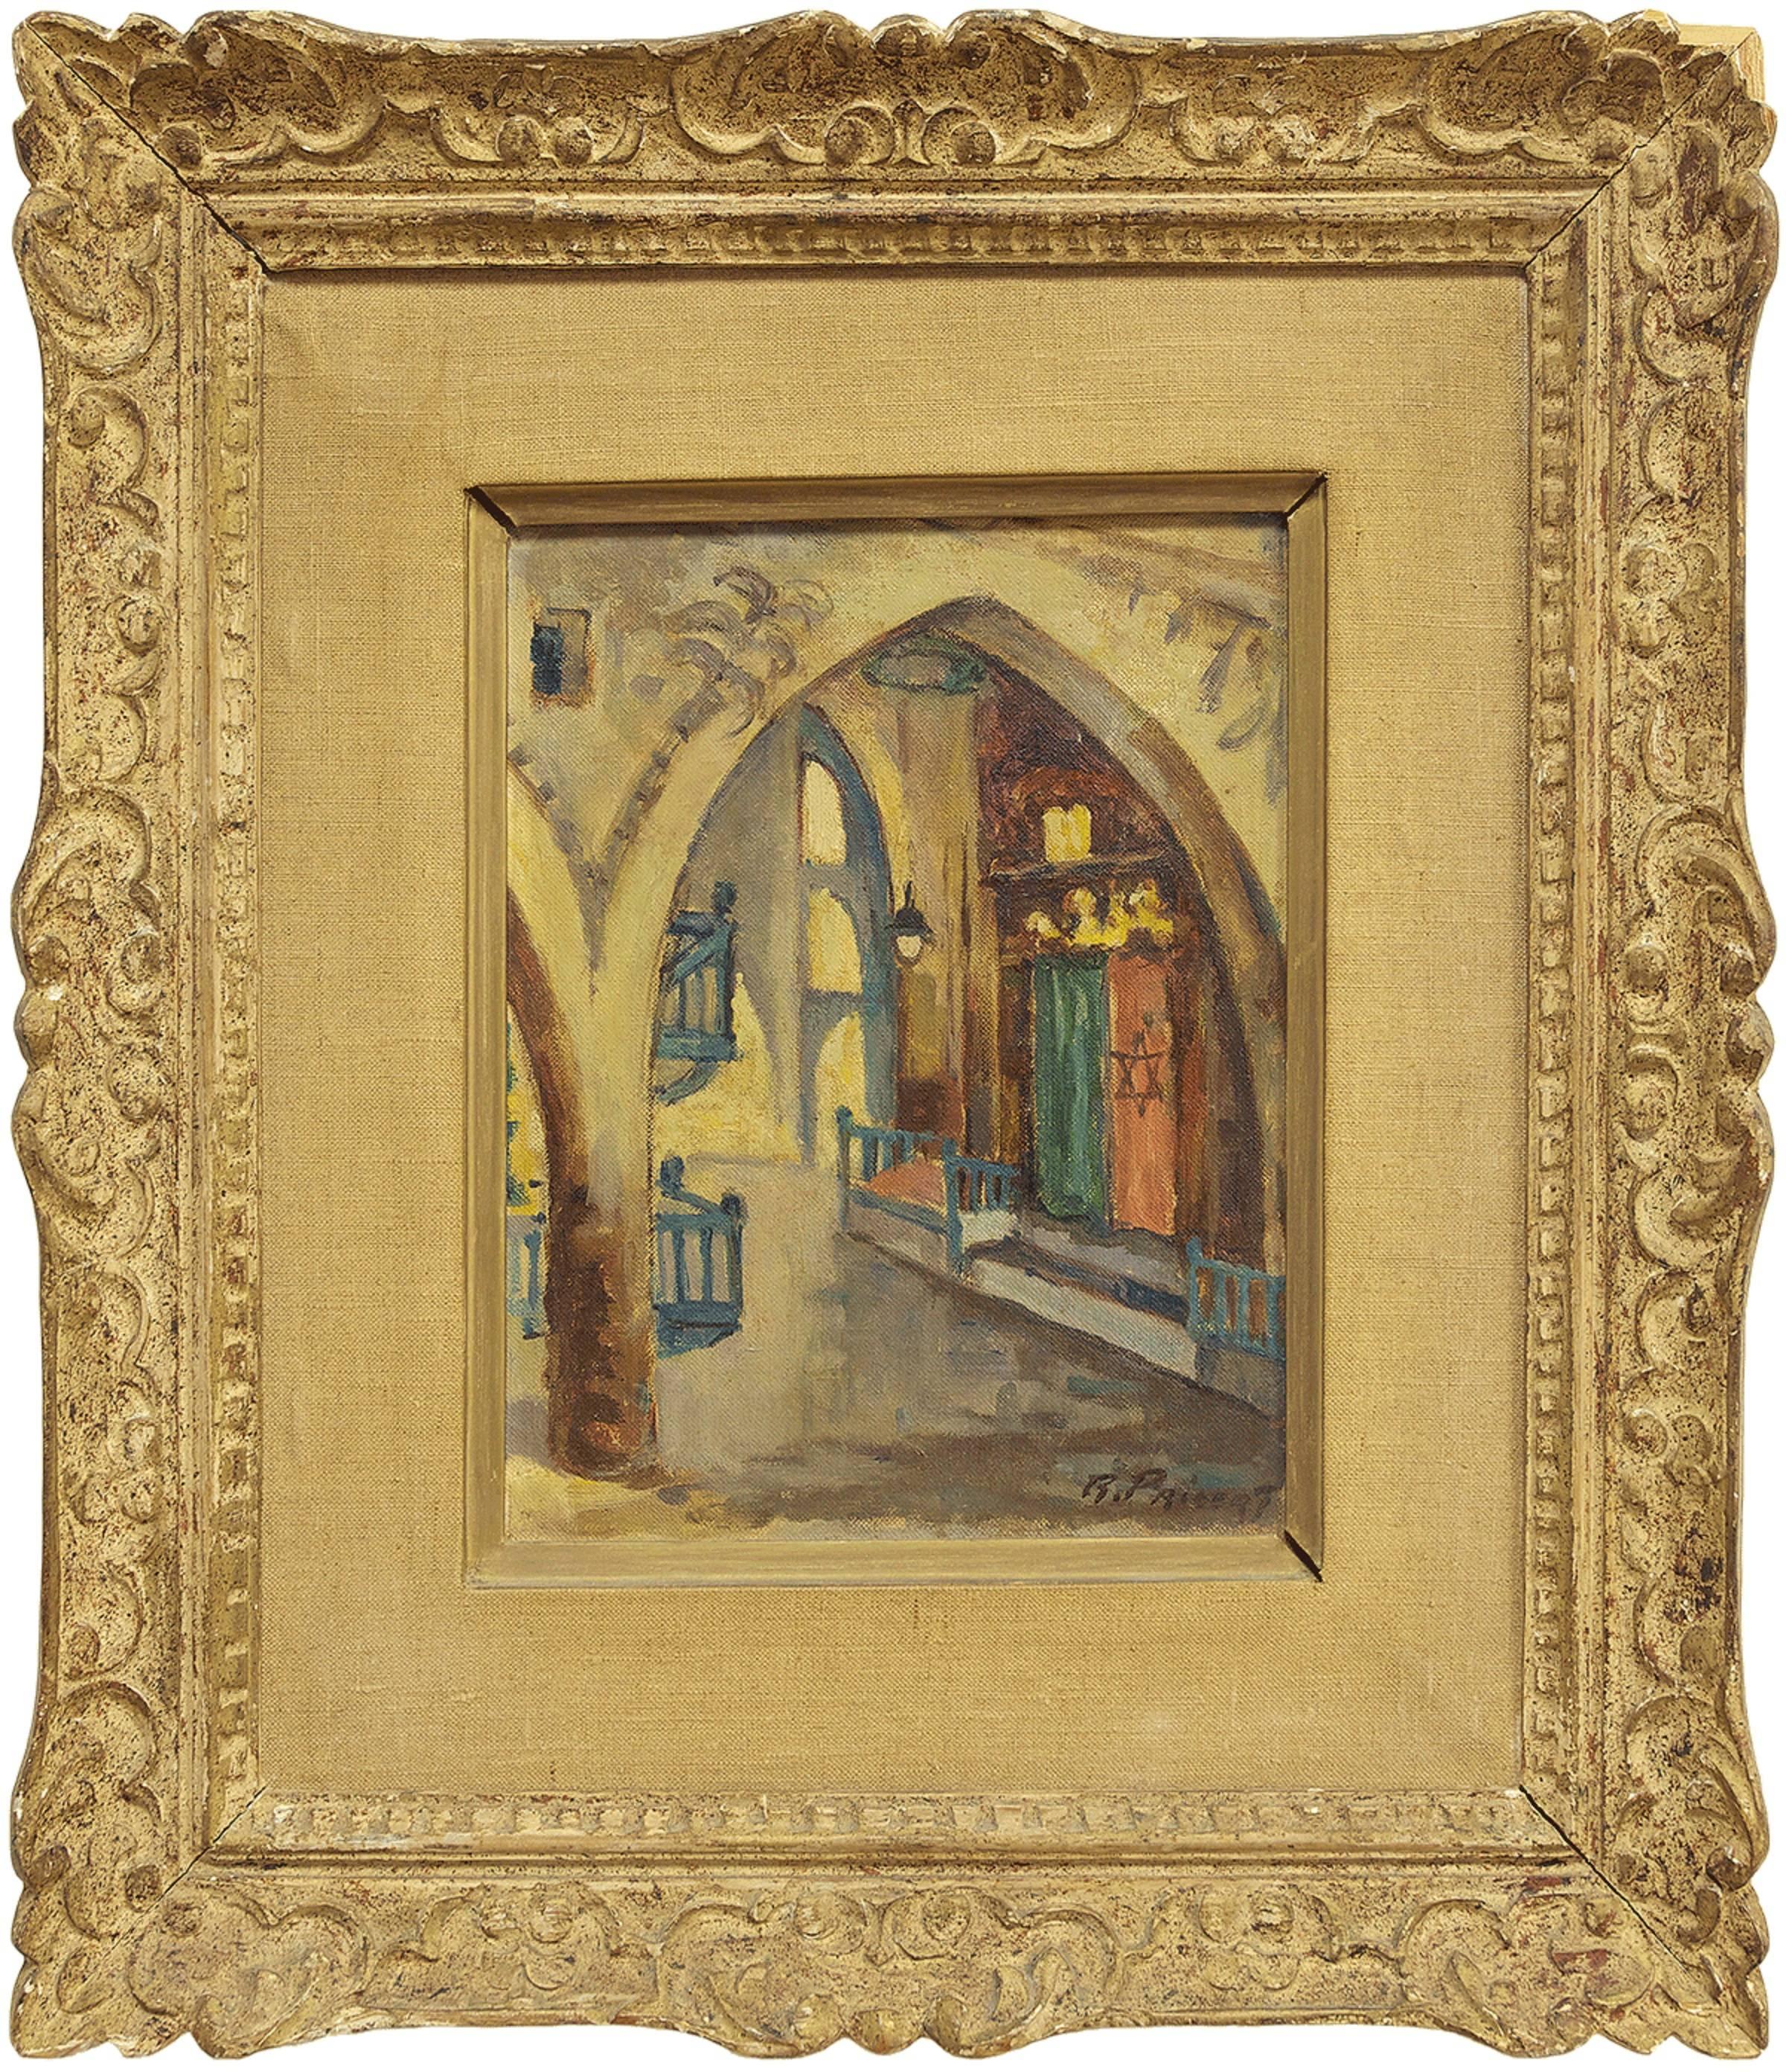 Old Synagogue in Safed Israel - Painting by Raphael Pricert